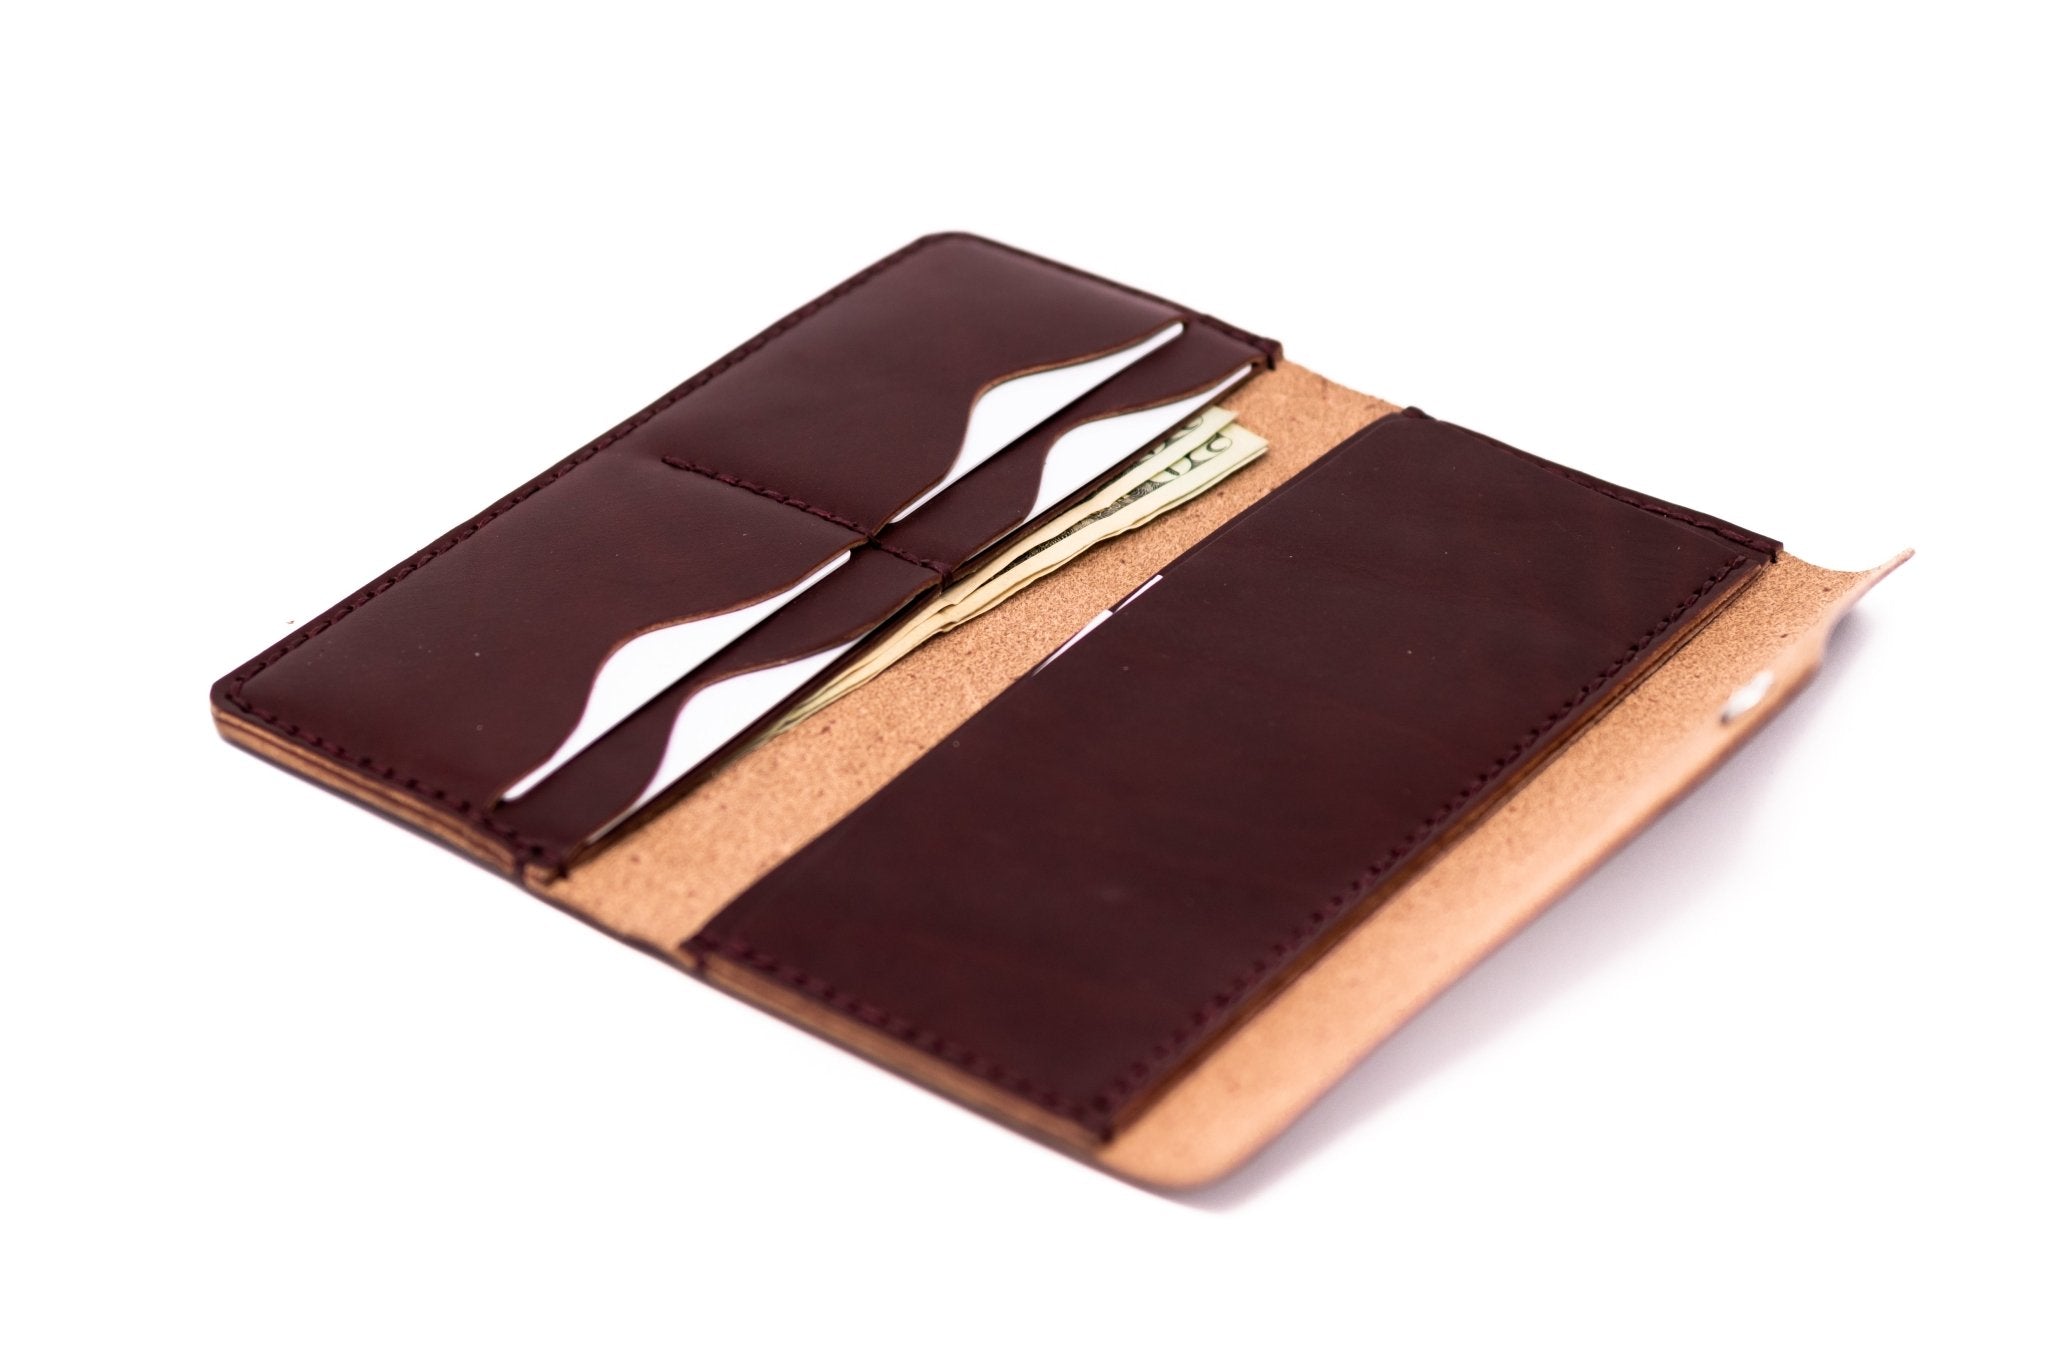 The Avery - Lost Dutchman Leather handmade leather wallets